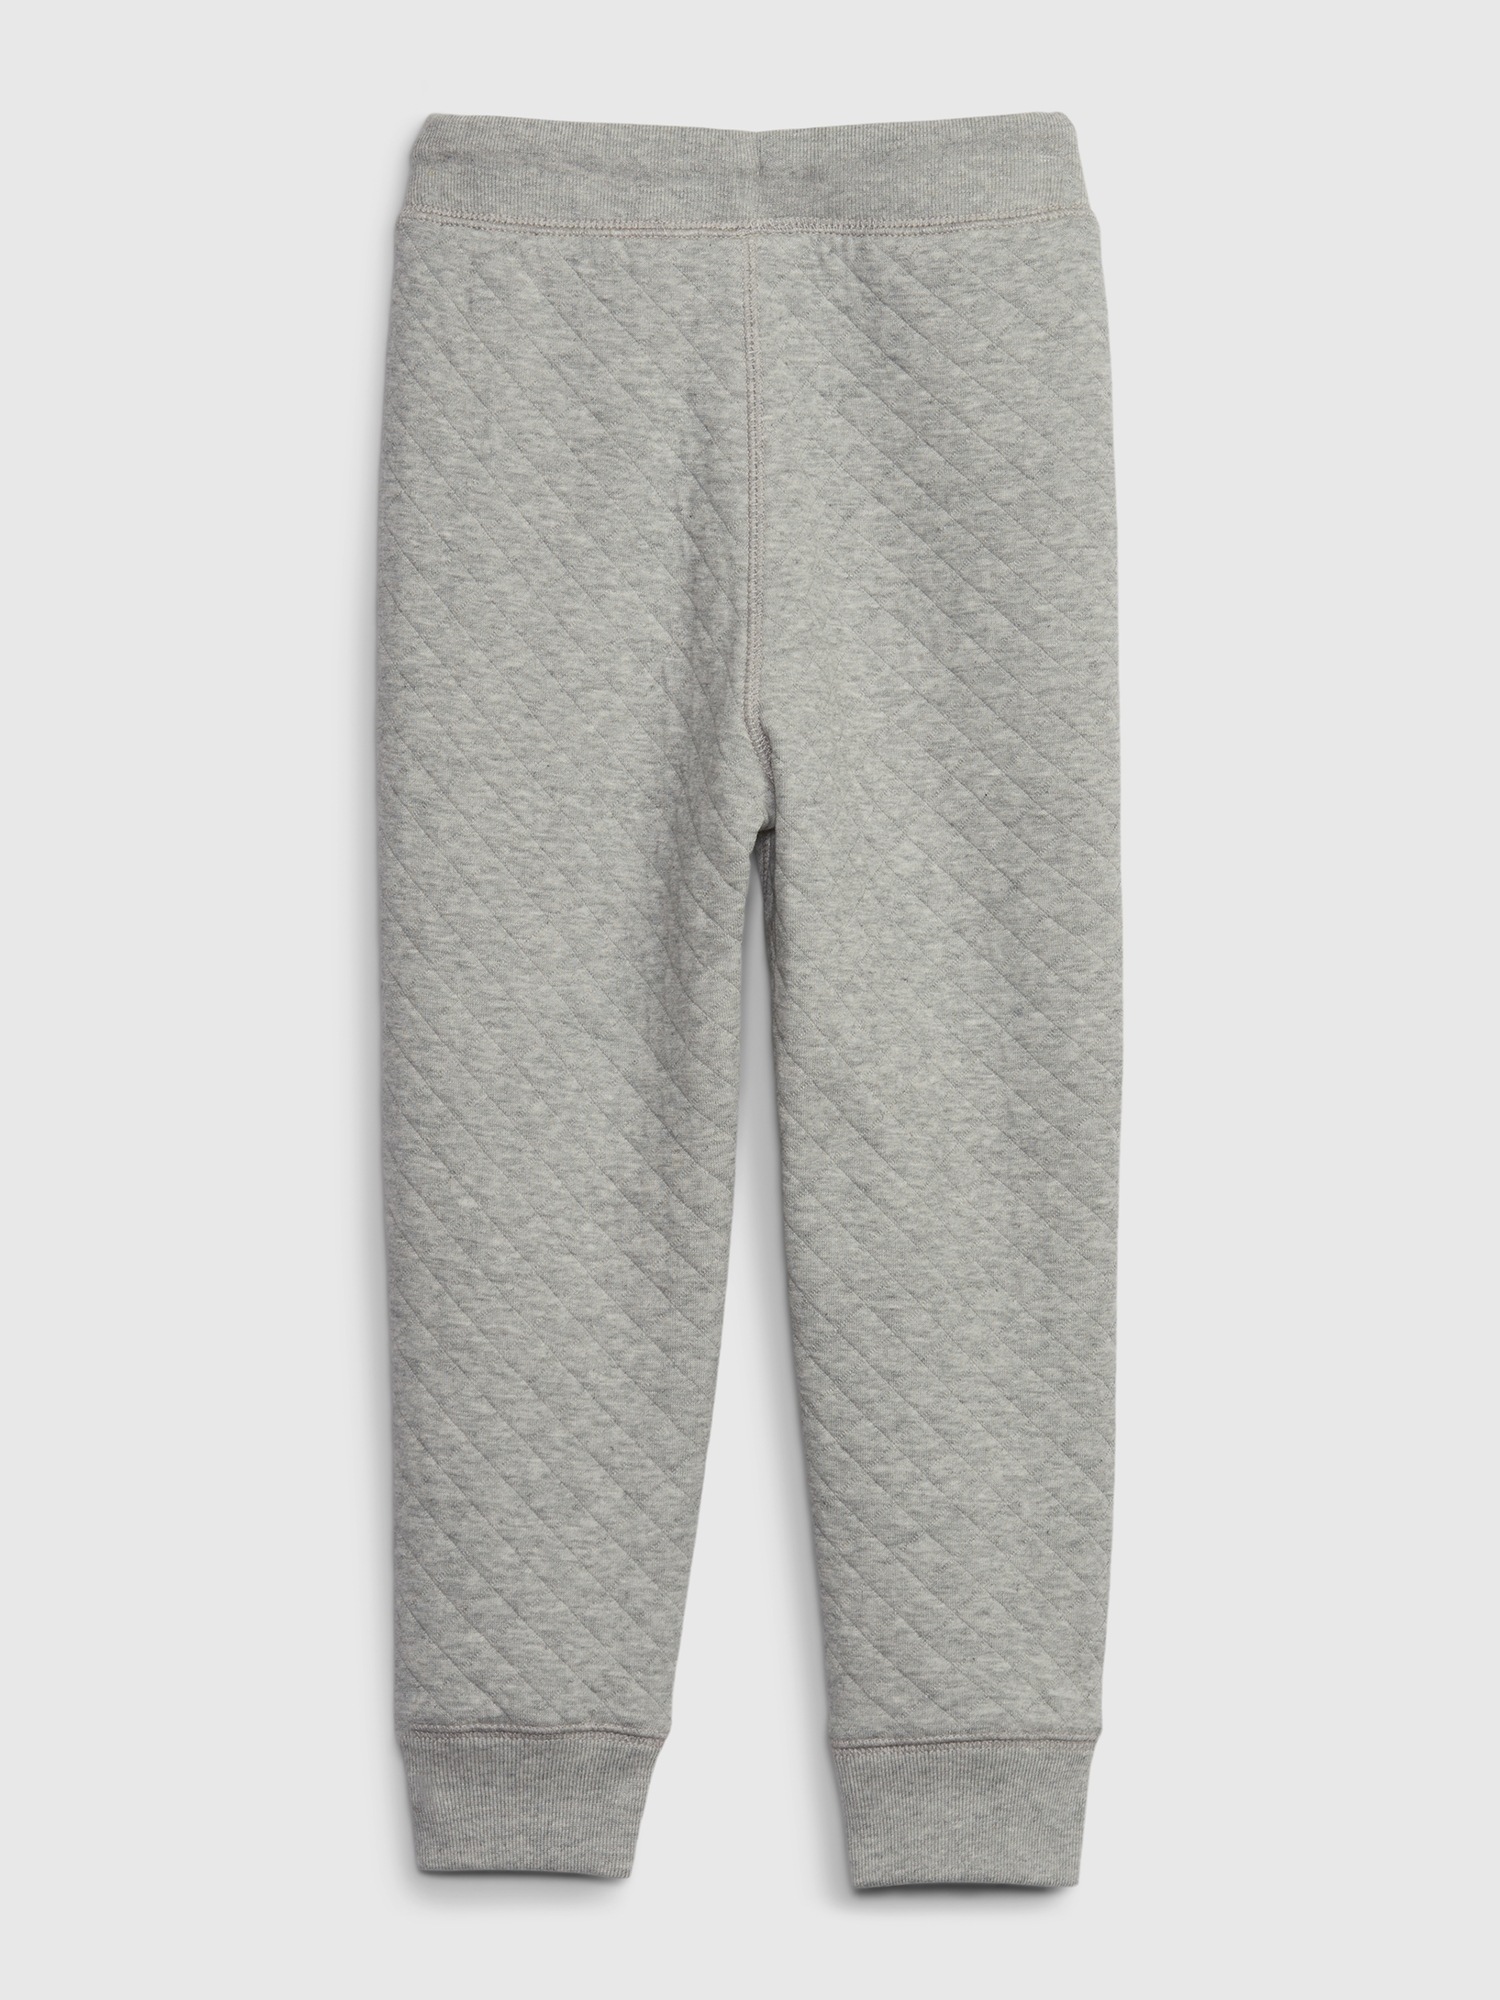 Quilted Sweatpants - Heather Grey